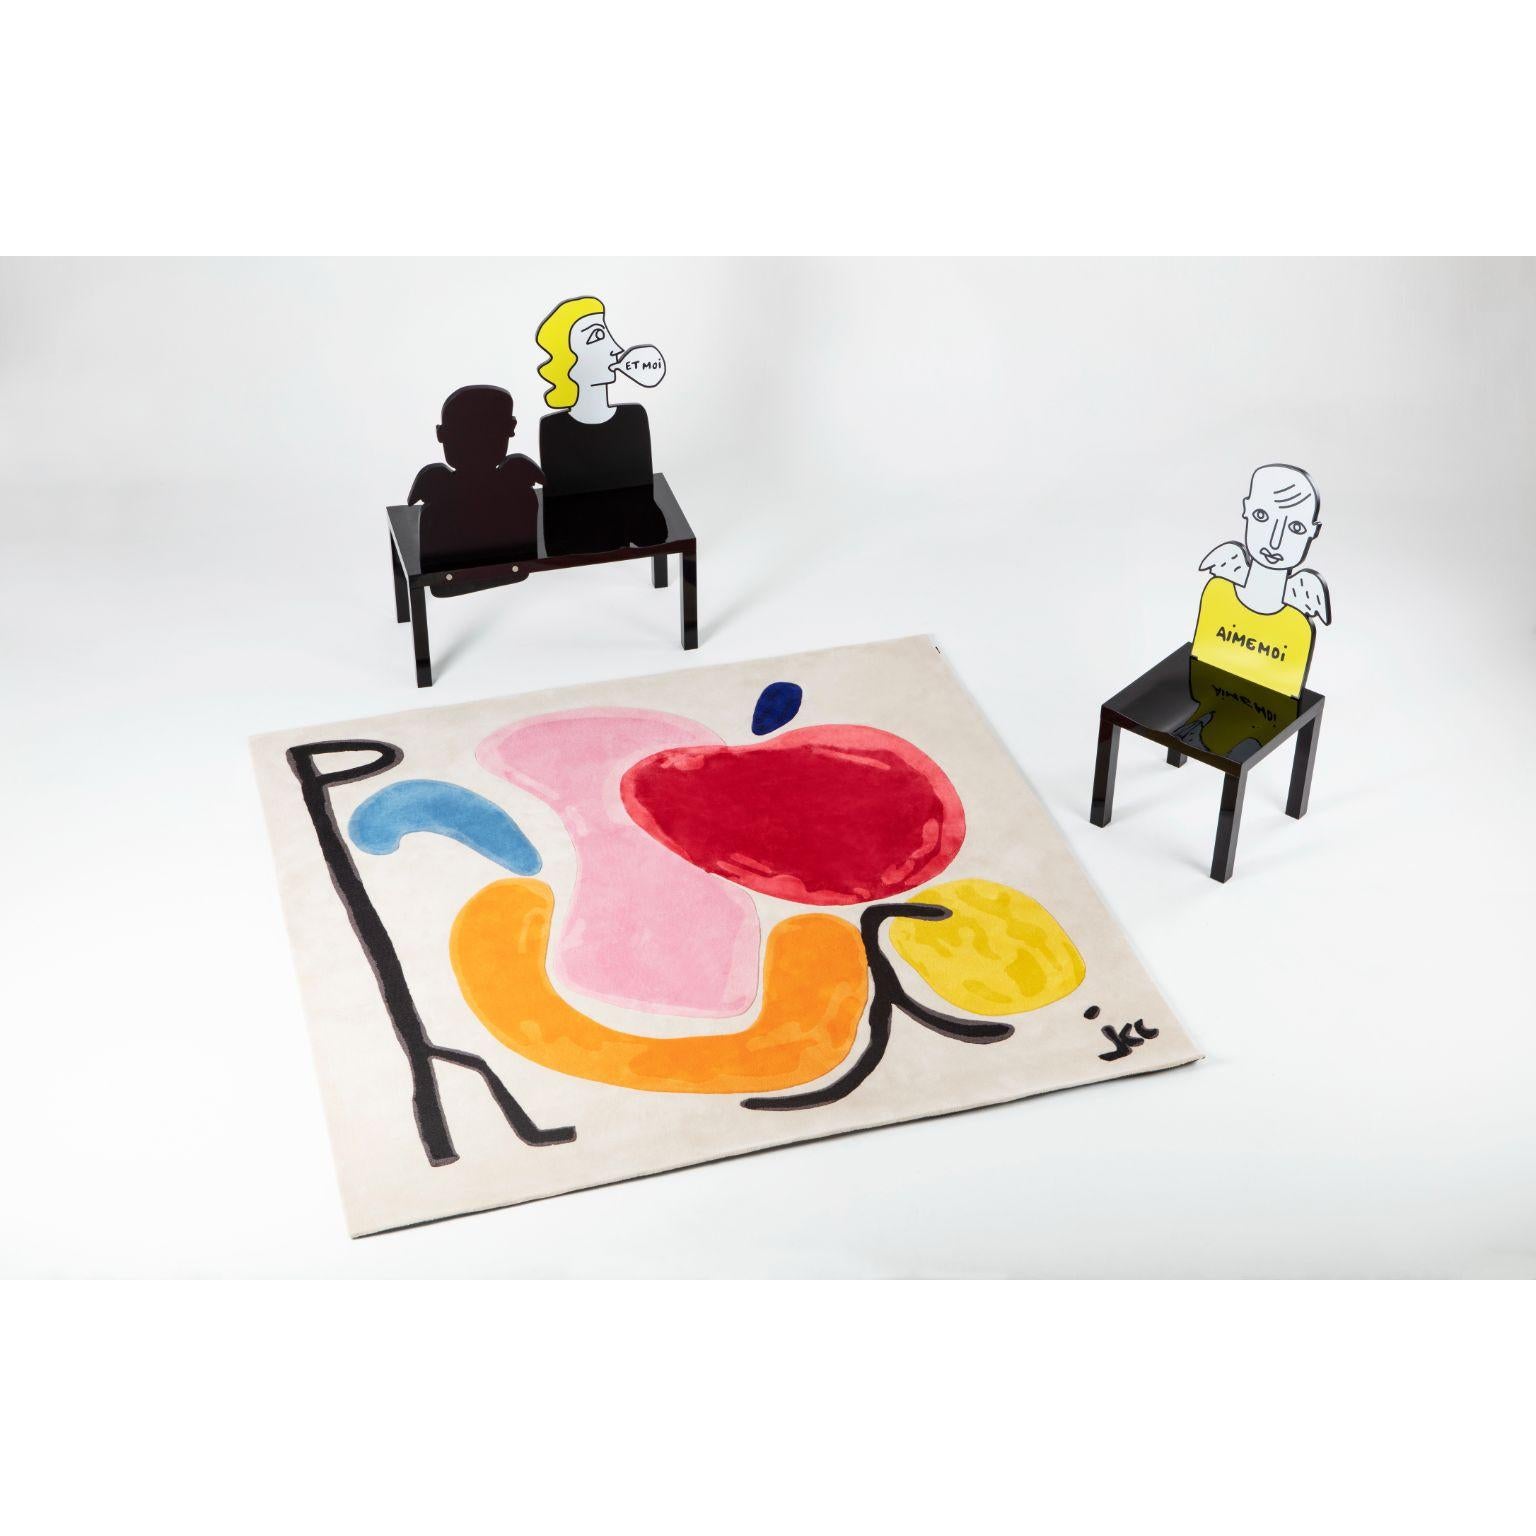 Wool Mano Chrome Rug by Jean-Charles de Castelbajac For Sale